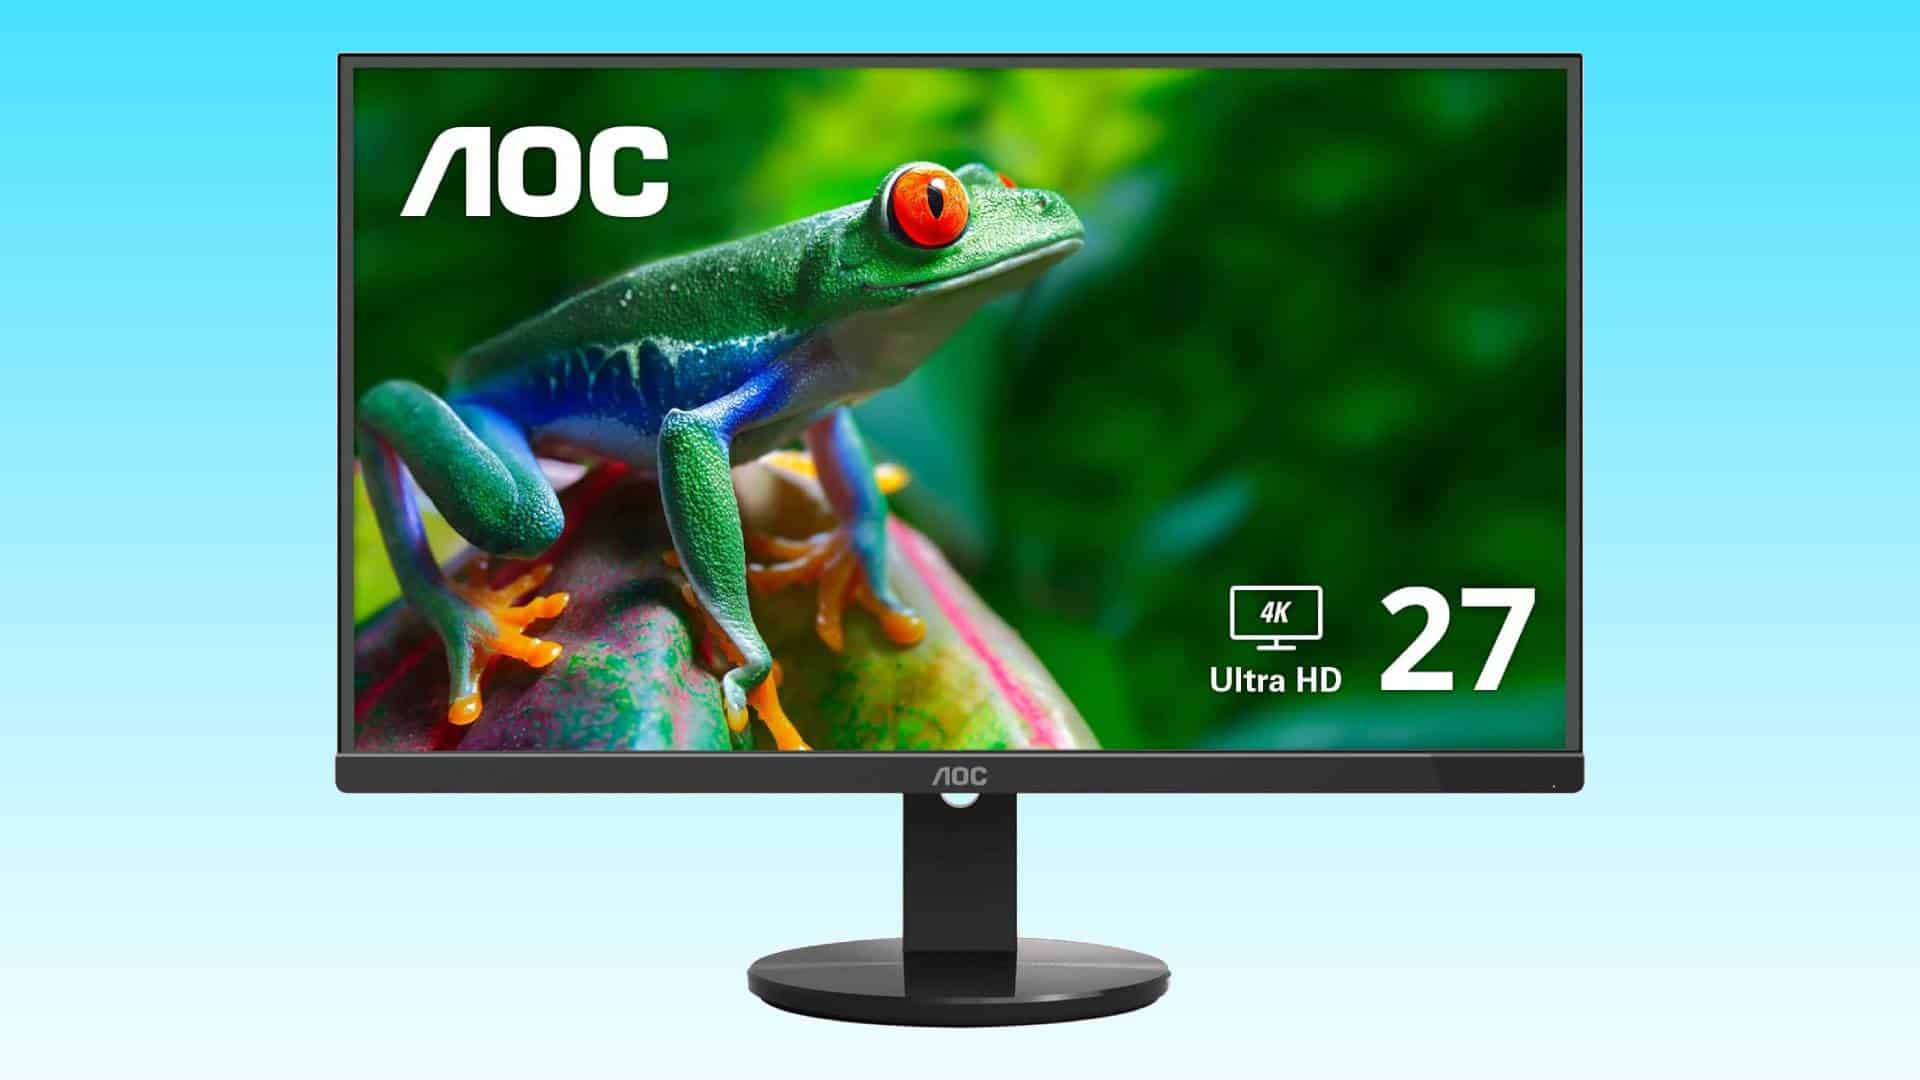 A 27-inch AOC 4K Ultra HD monitor, perfect for photo editing, displaying a vibrant image of a red-eyed tree frog.